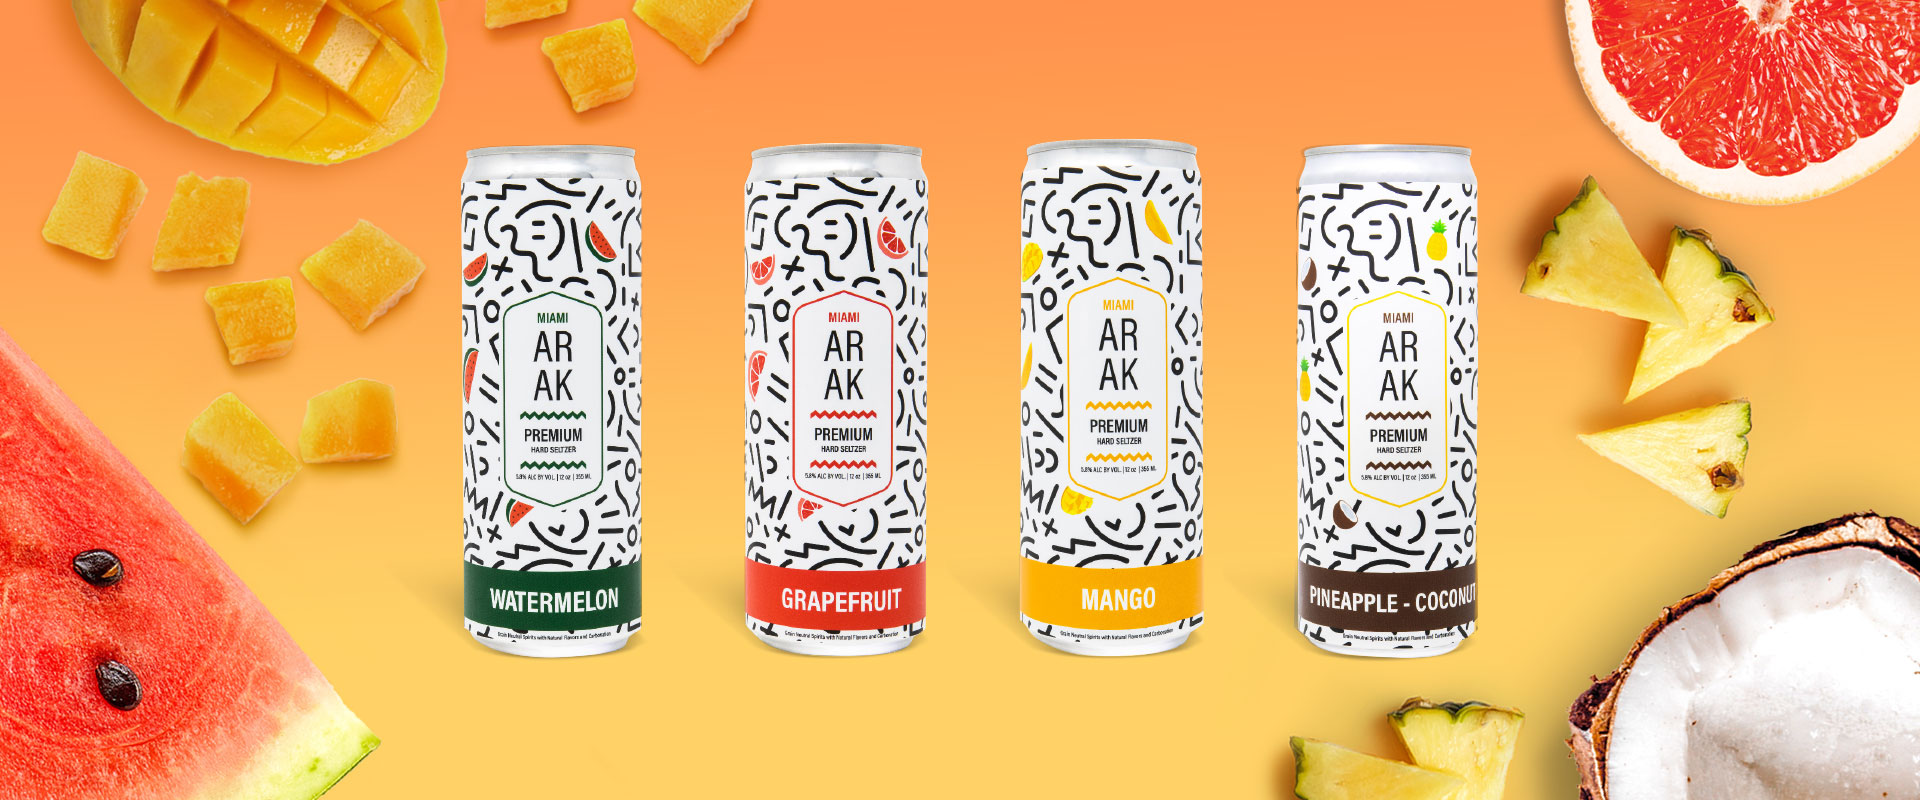 Miami Arak Website slide of cans and flavors